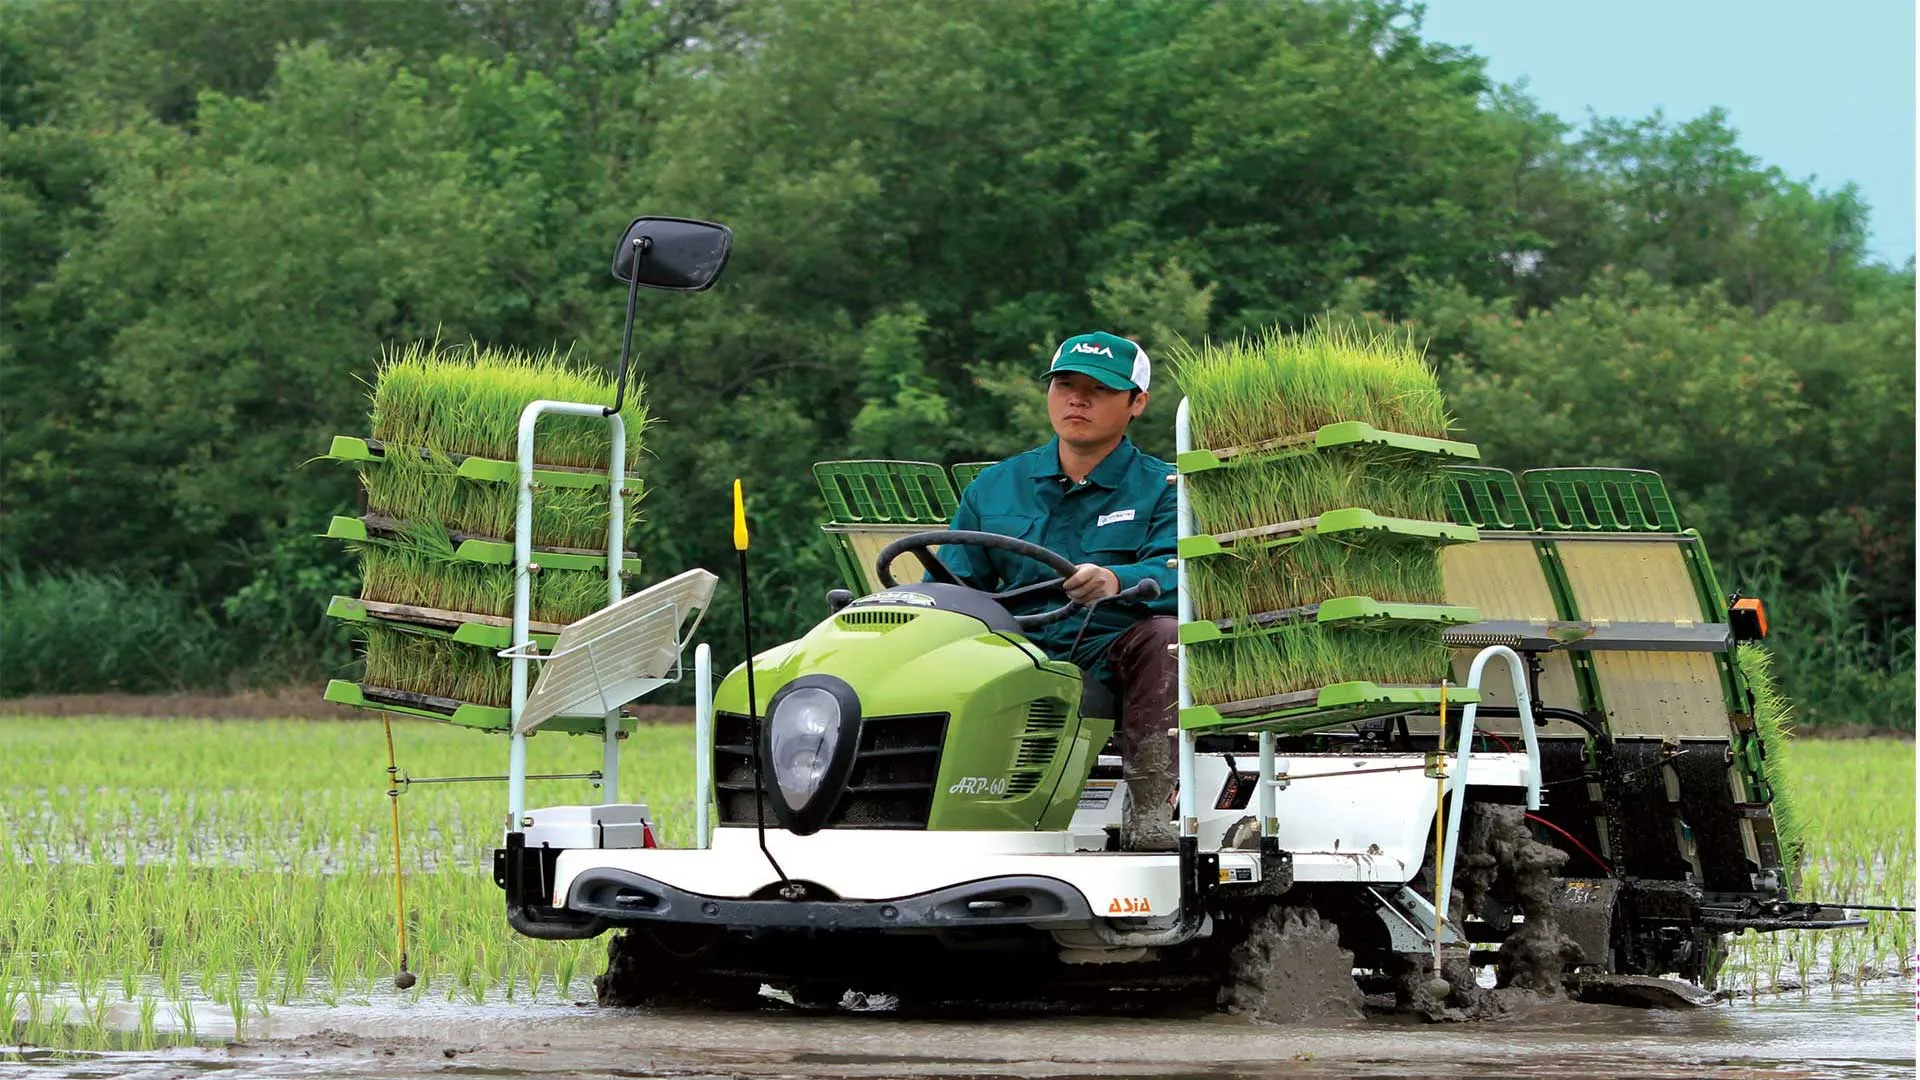 Asia Agricultural Machinery > Customer Story > Dassault Systèmes®